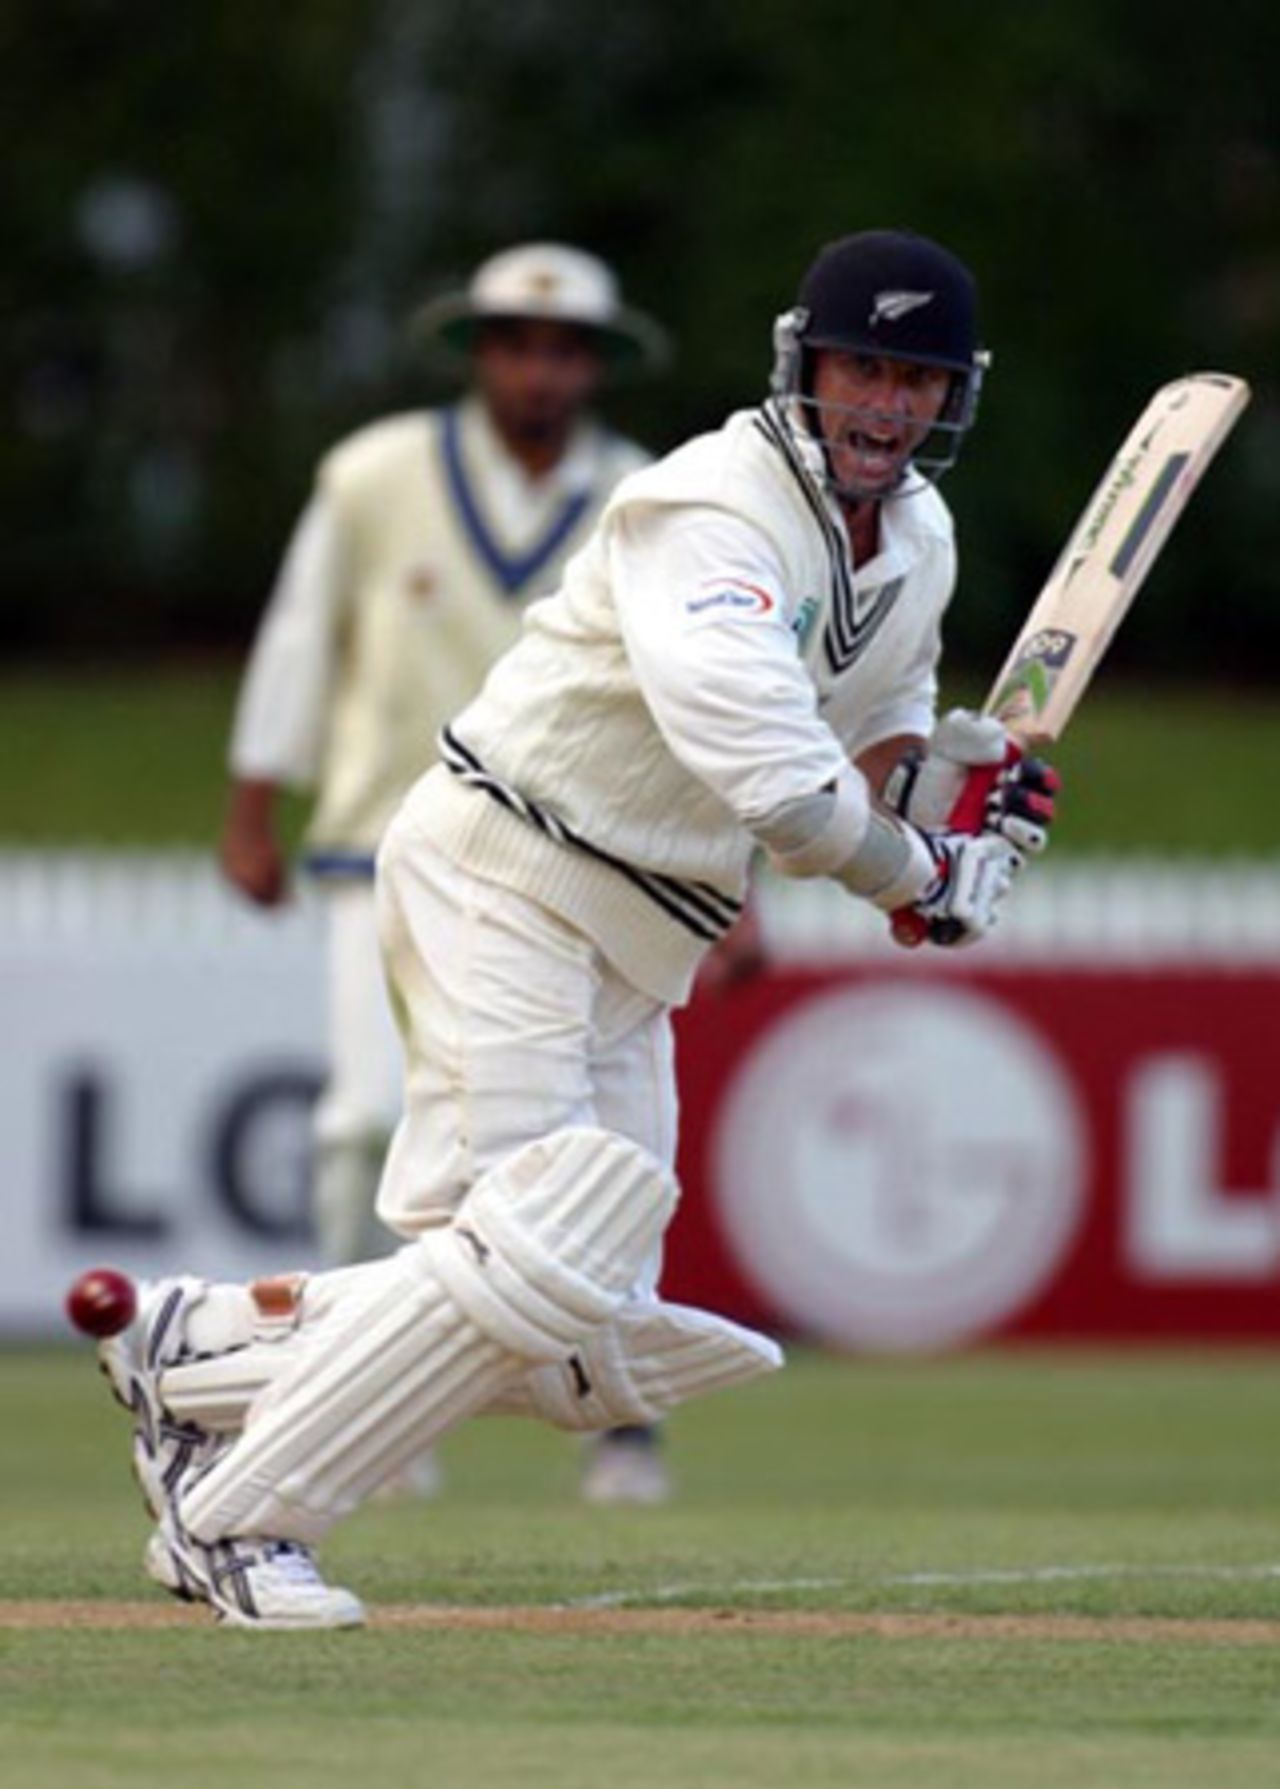 New Zealand batsman Mark Richardson turns a delivery through square leg during his second innings. Richardson ended the third day on 18 not out. 2nd Test: New Zealand v India at Westpac Park, Hamilton, 19-23 December 2002 (21 December 2002).